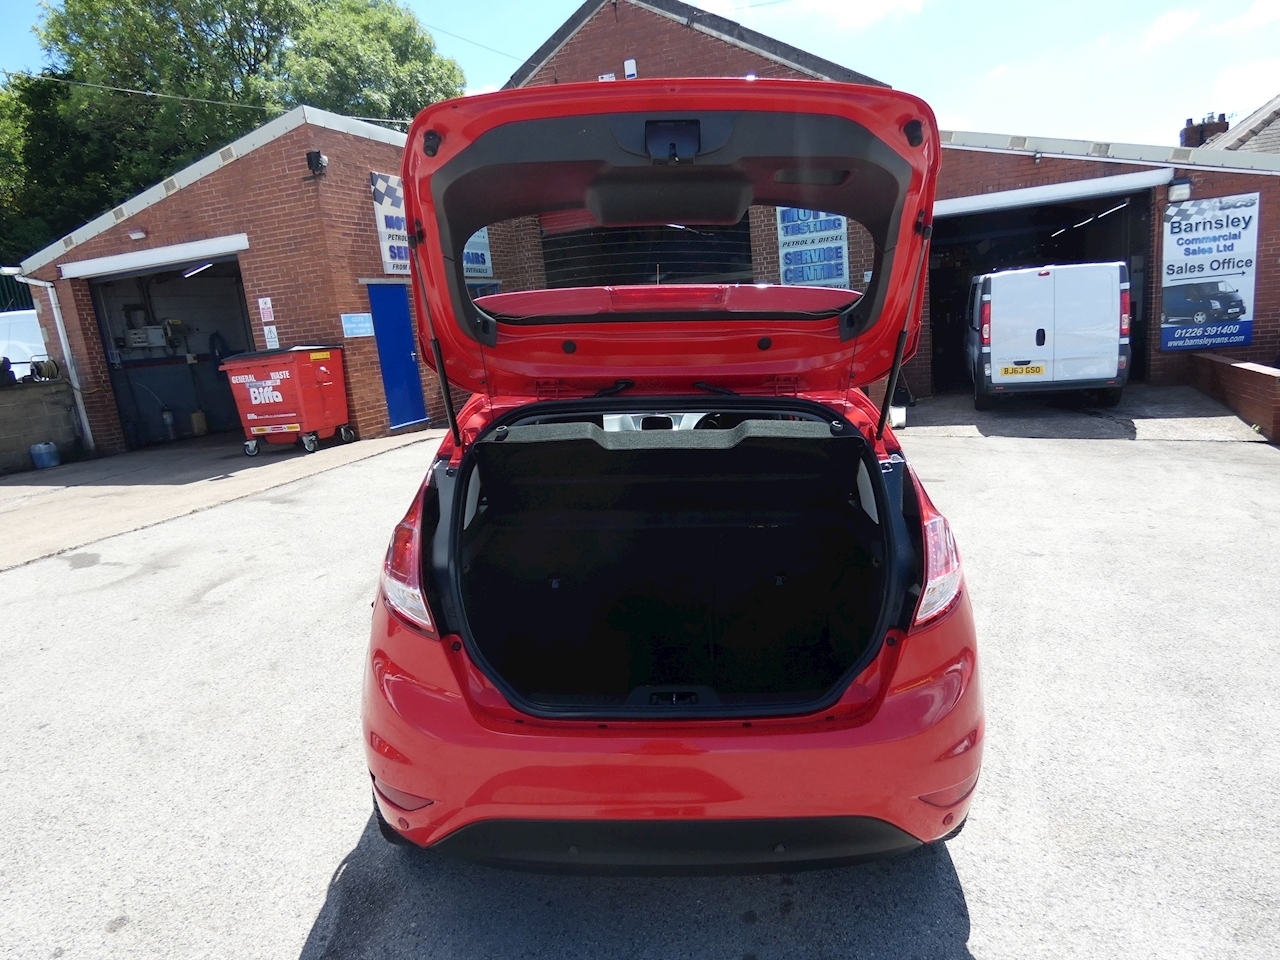 2017 66 FORD FIESTA 1.5TDCI ECONETIC ZETEC ONLY 41K EX COUNCIL